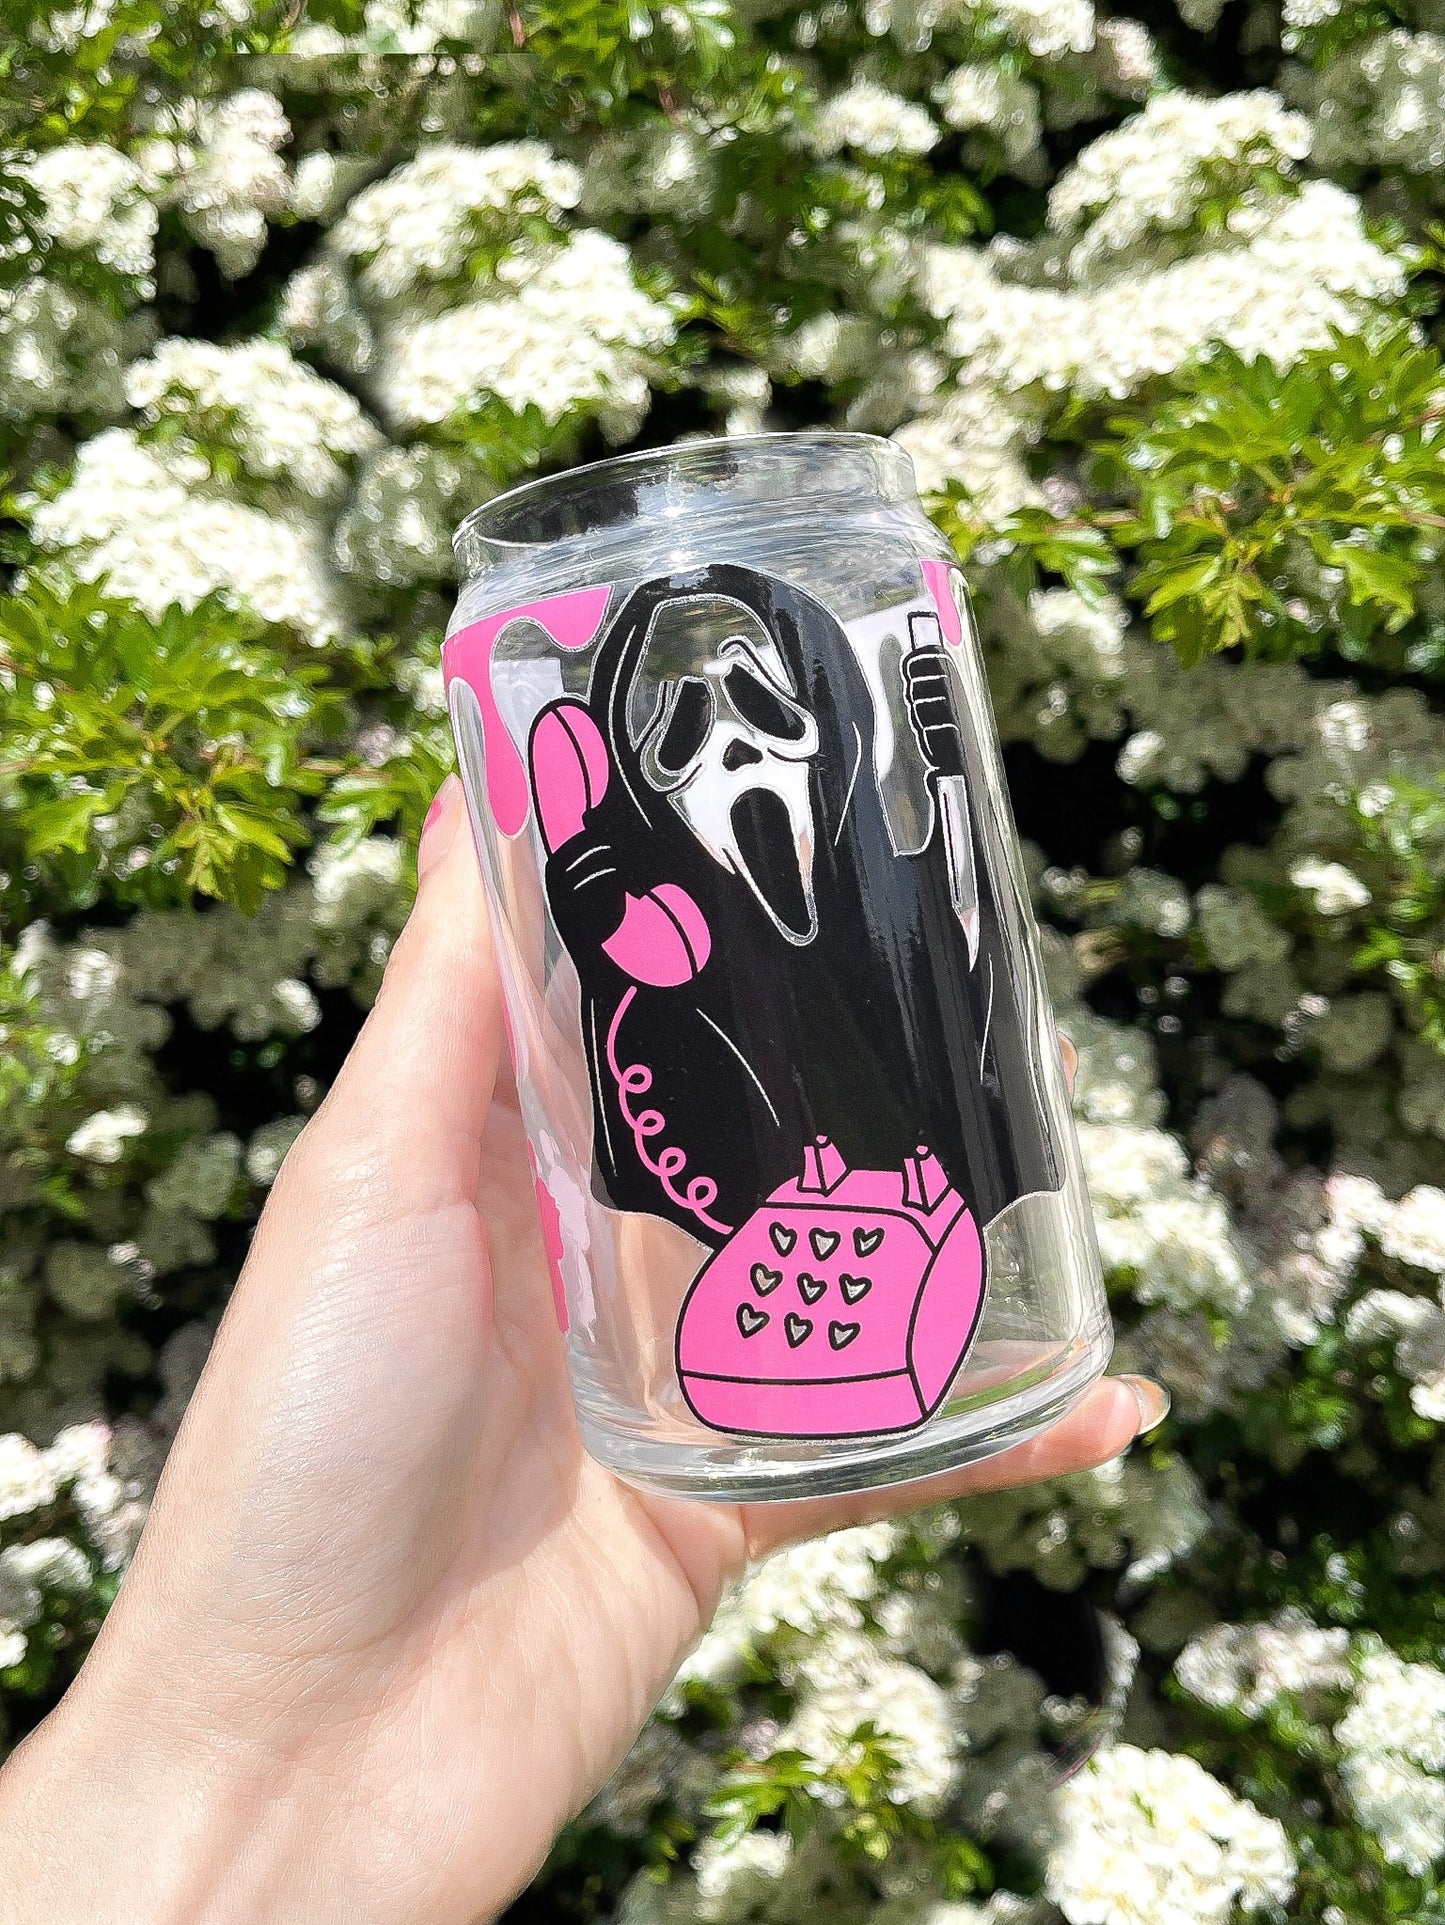 SCREAM GHOST FACE GLASS CAN